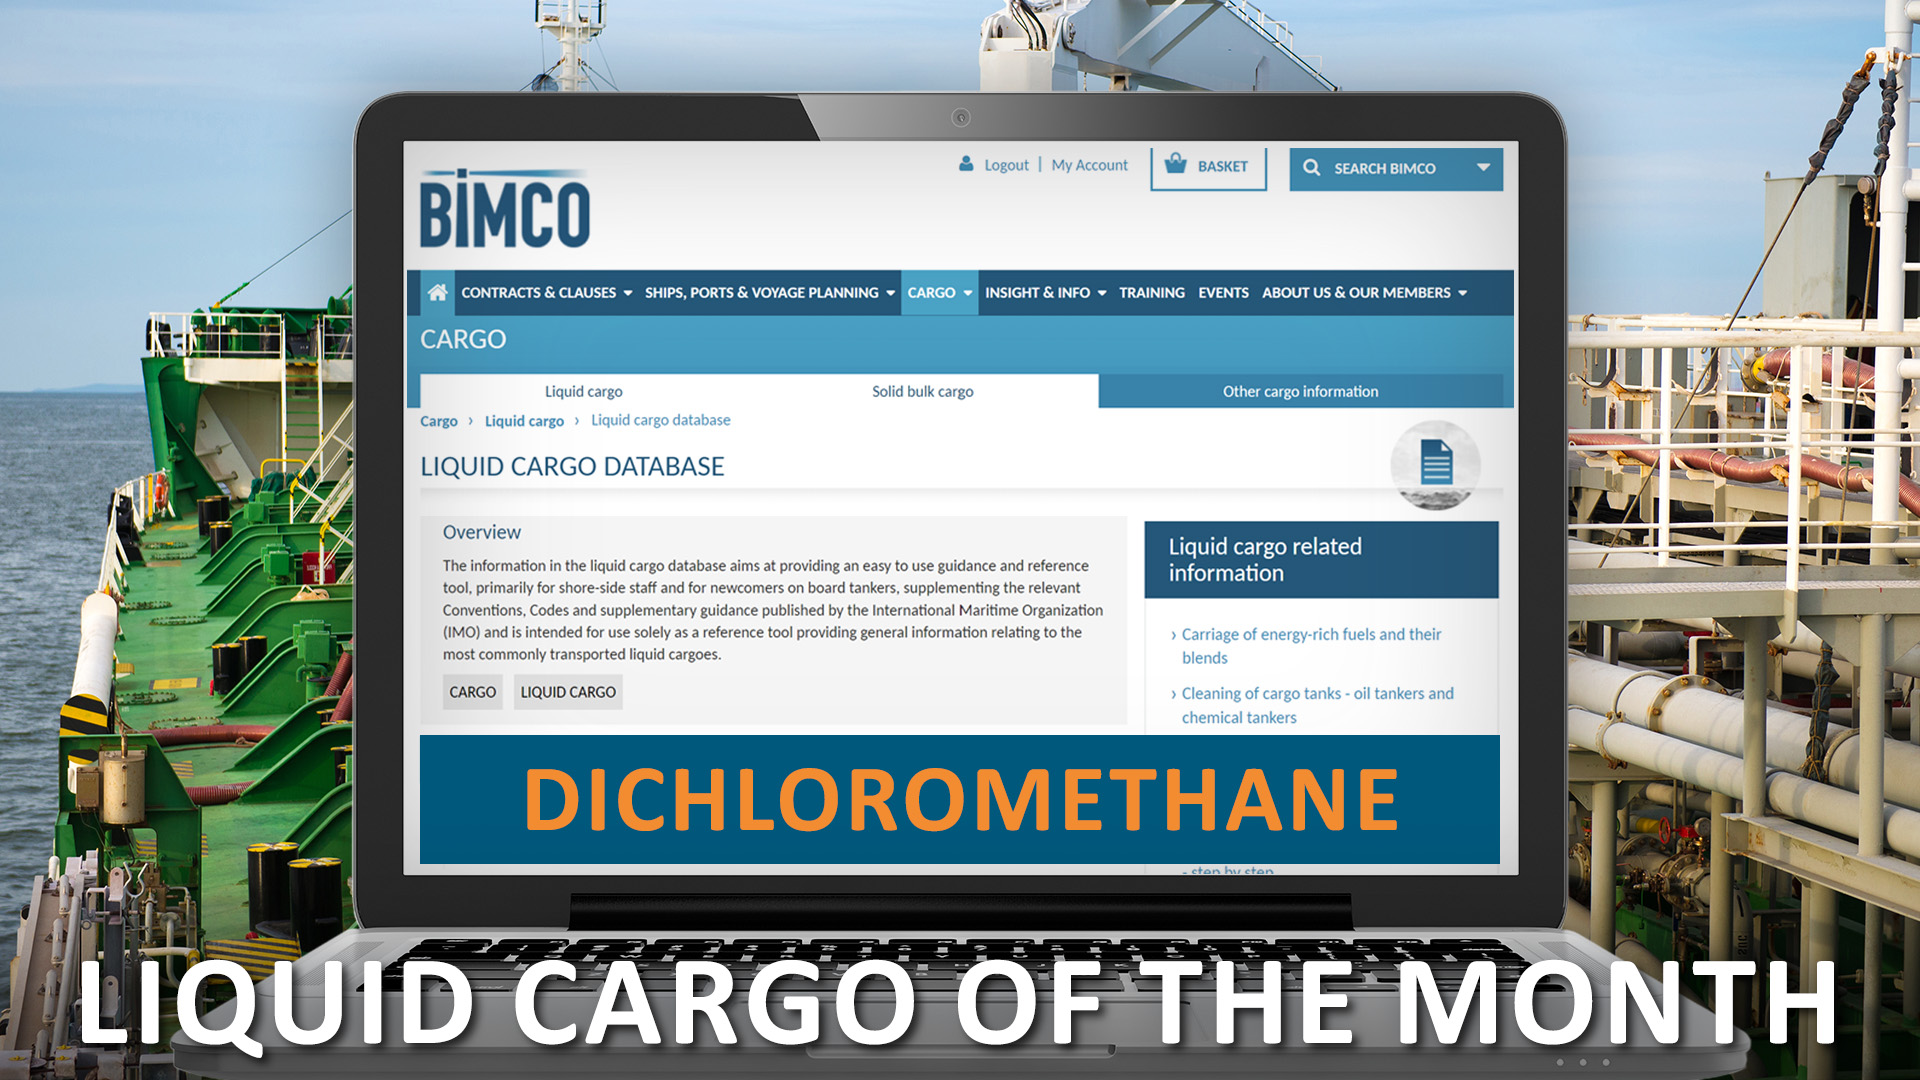 BIMCO website's liquid cargo of the month, dichloromethane on a laptop superimposed over chemical tanker ship